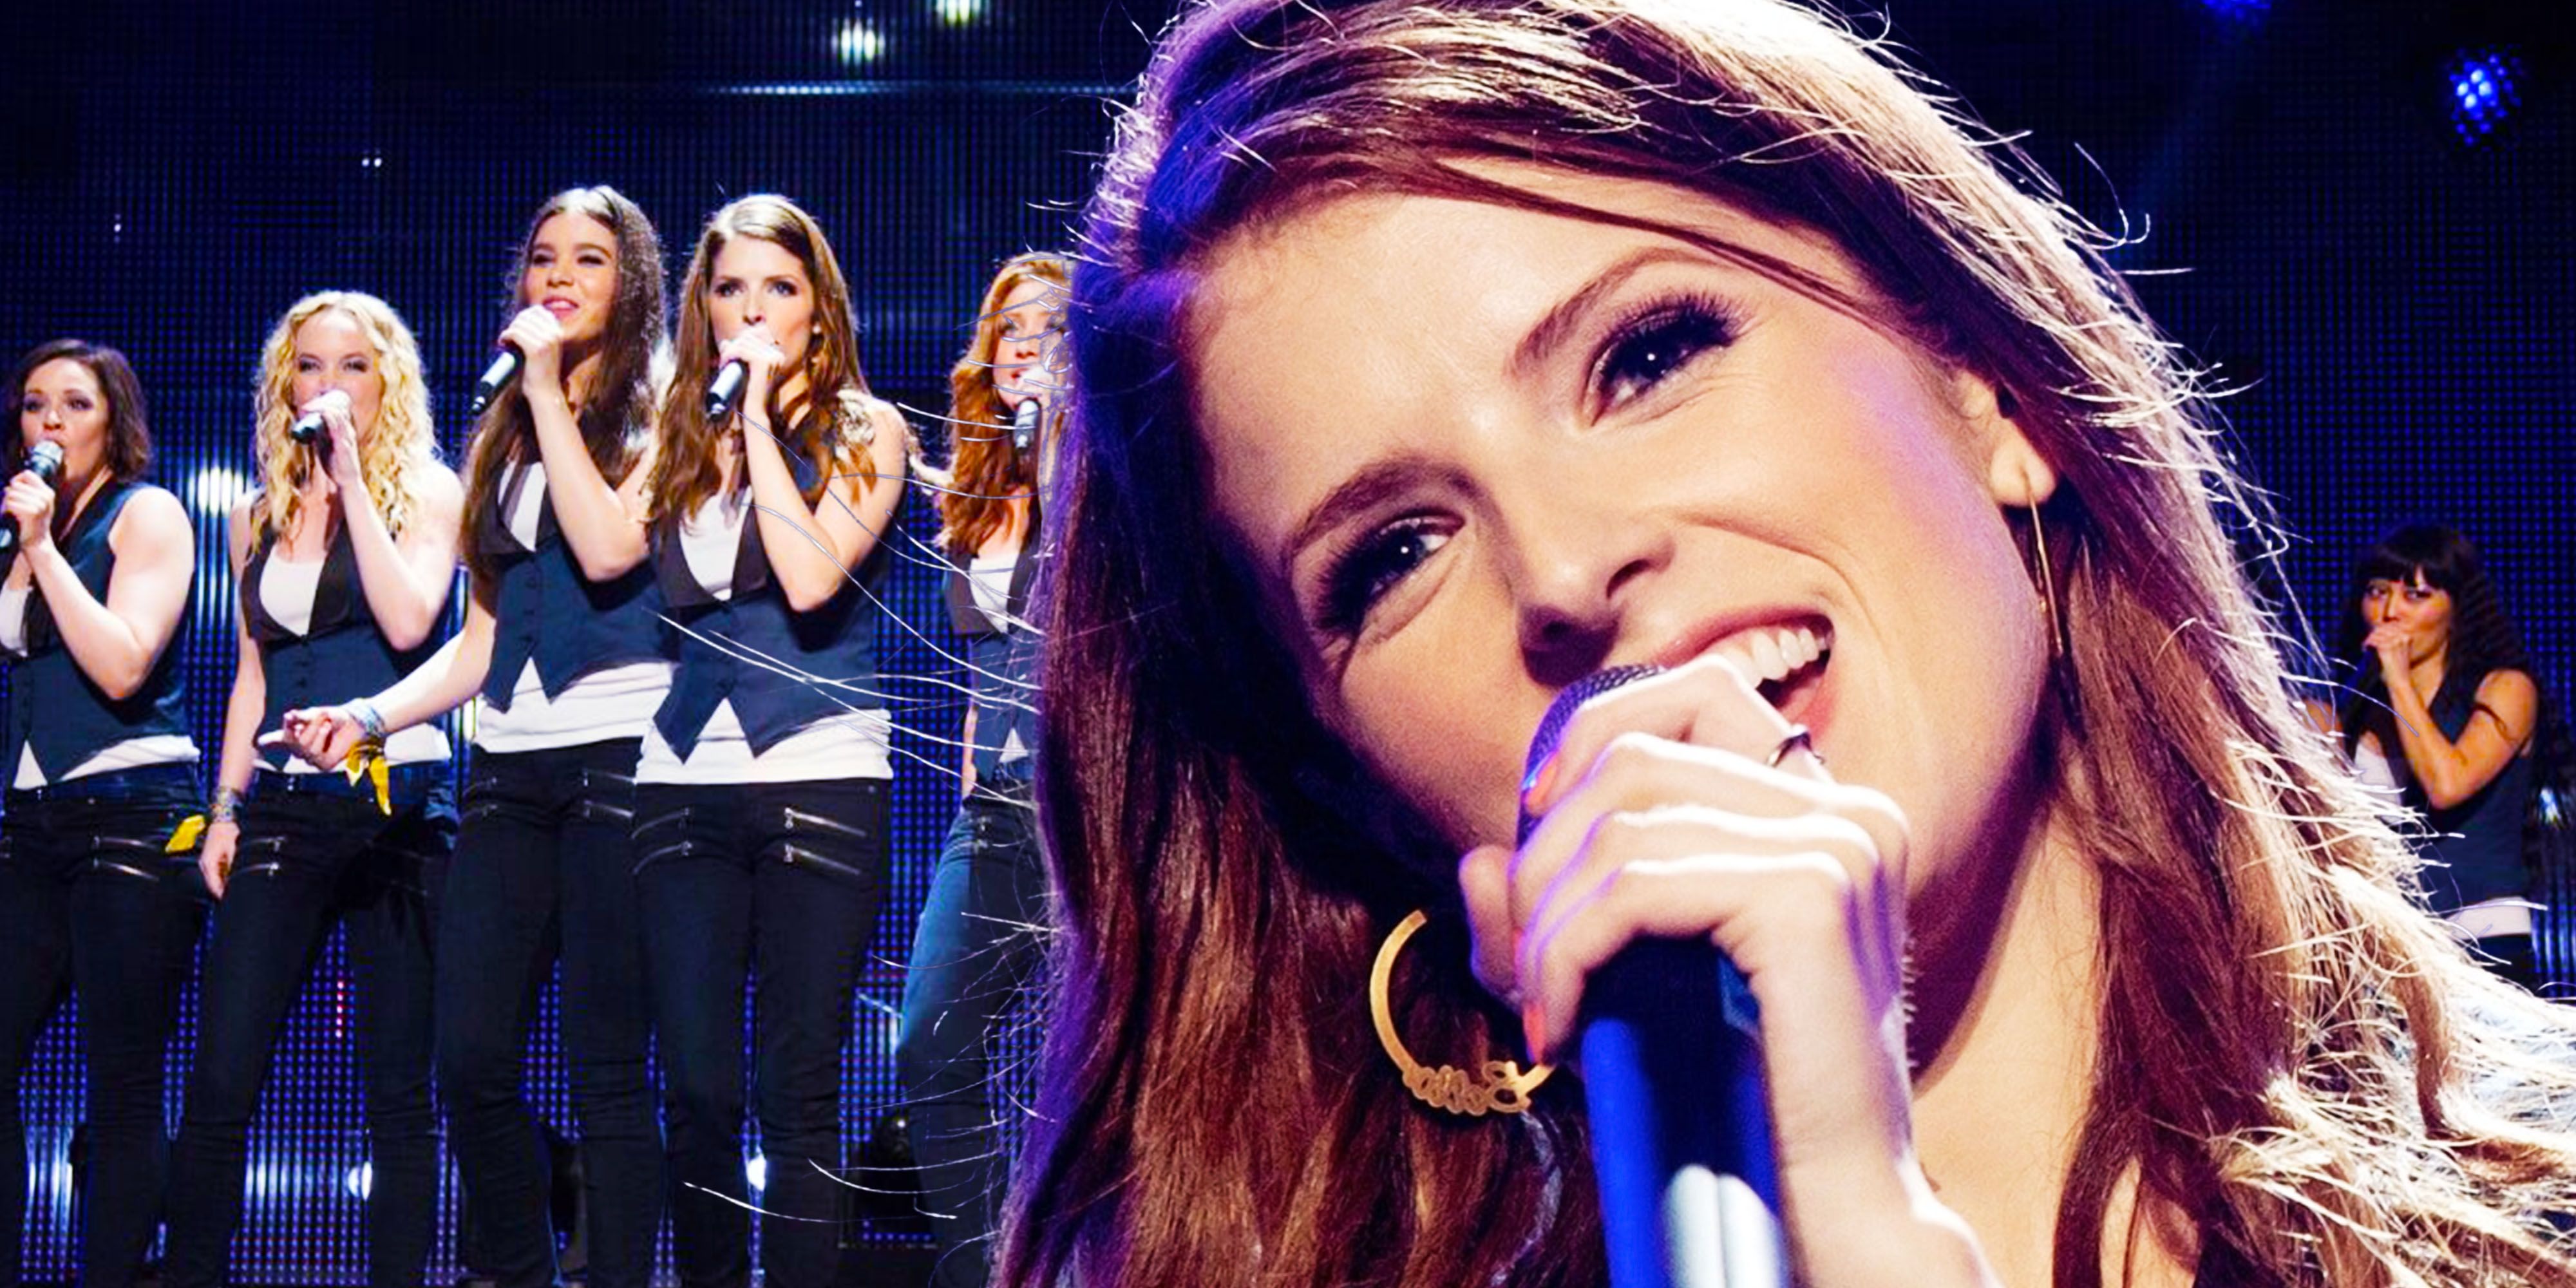 Anna Kendrick in Pitch Perfect with the Barden Bellas